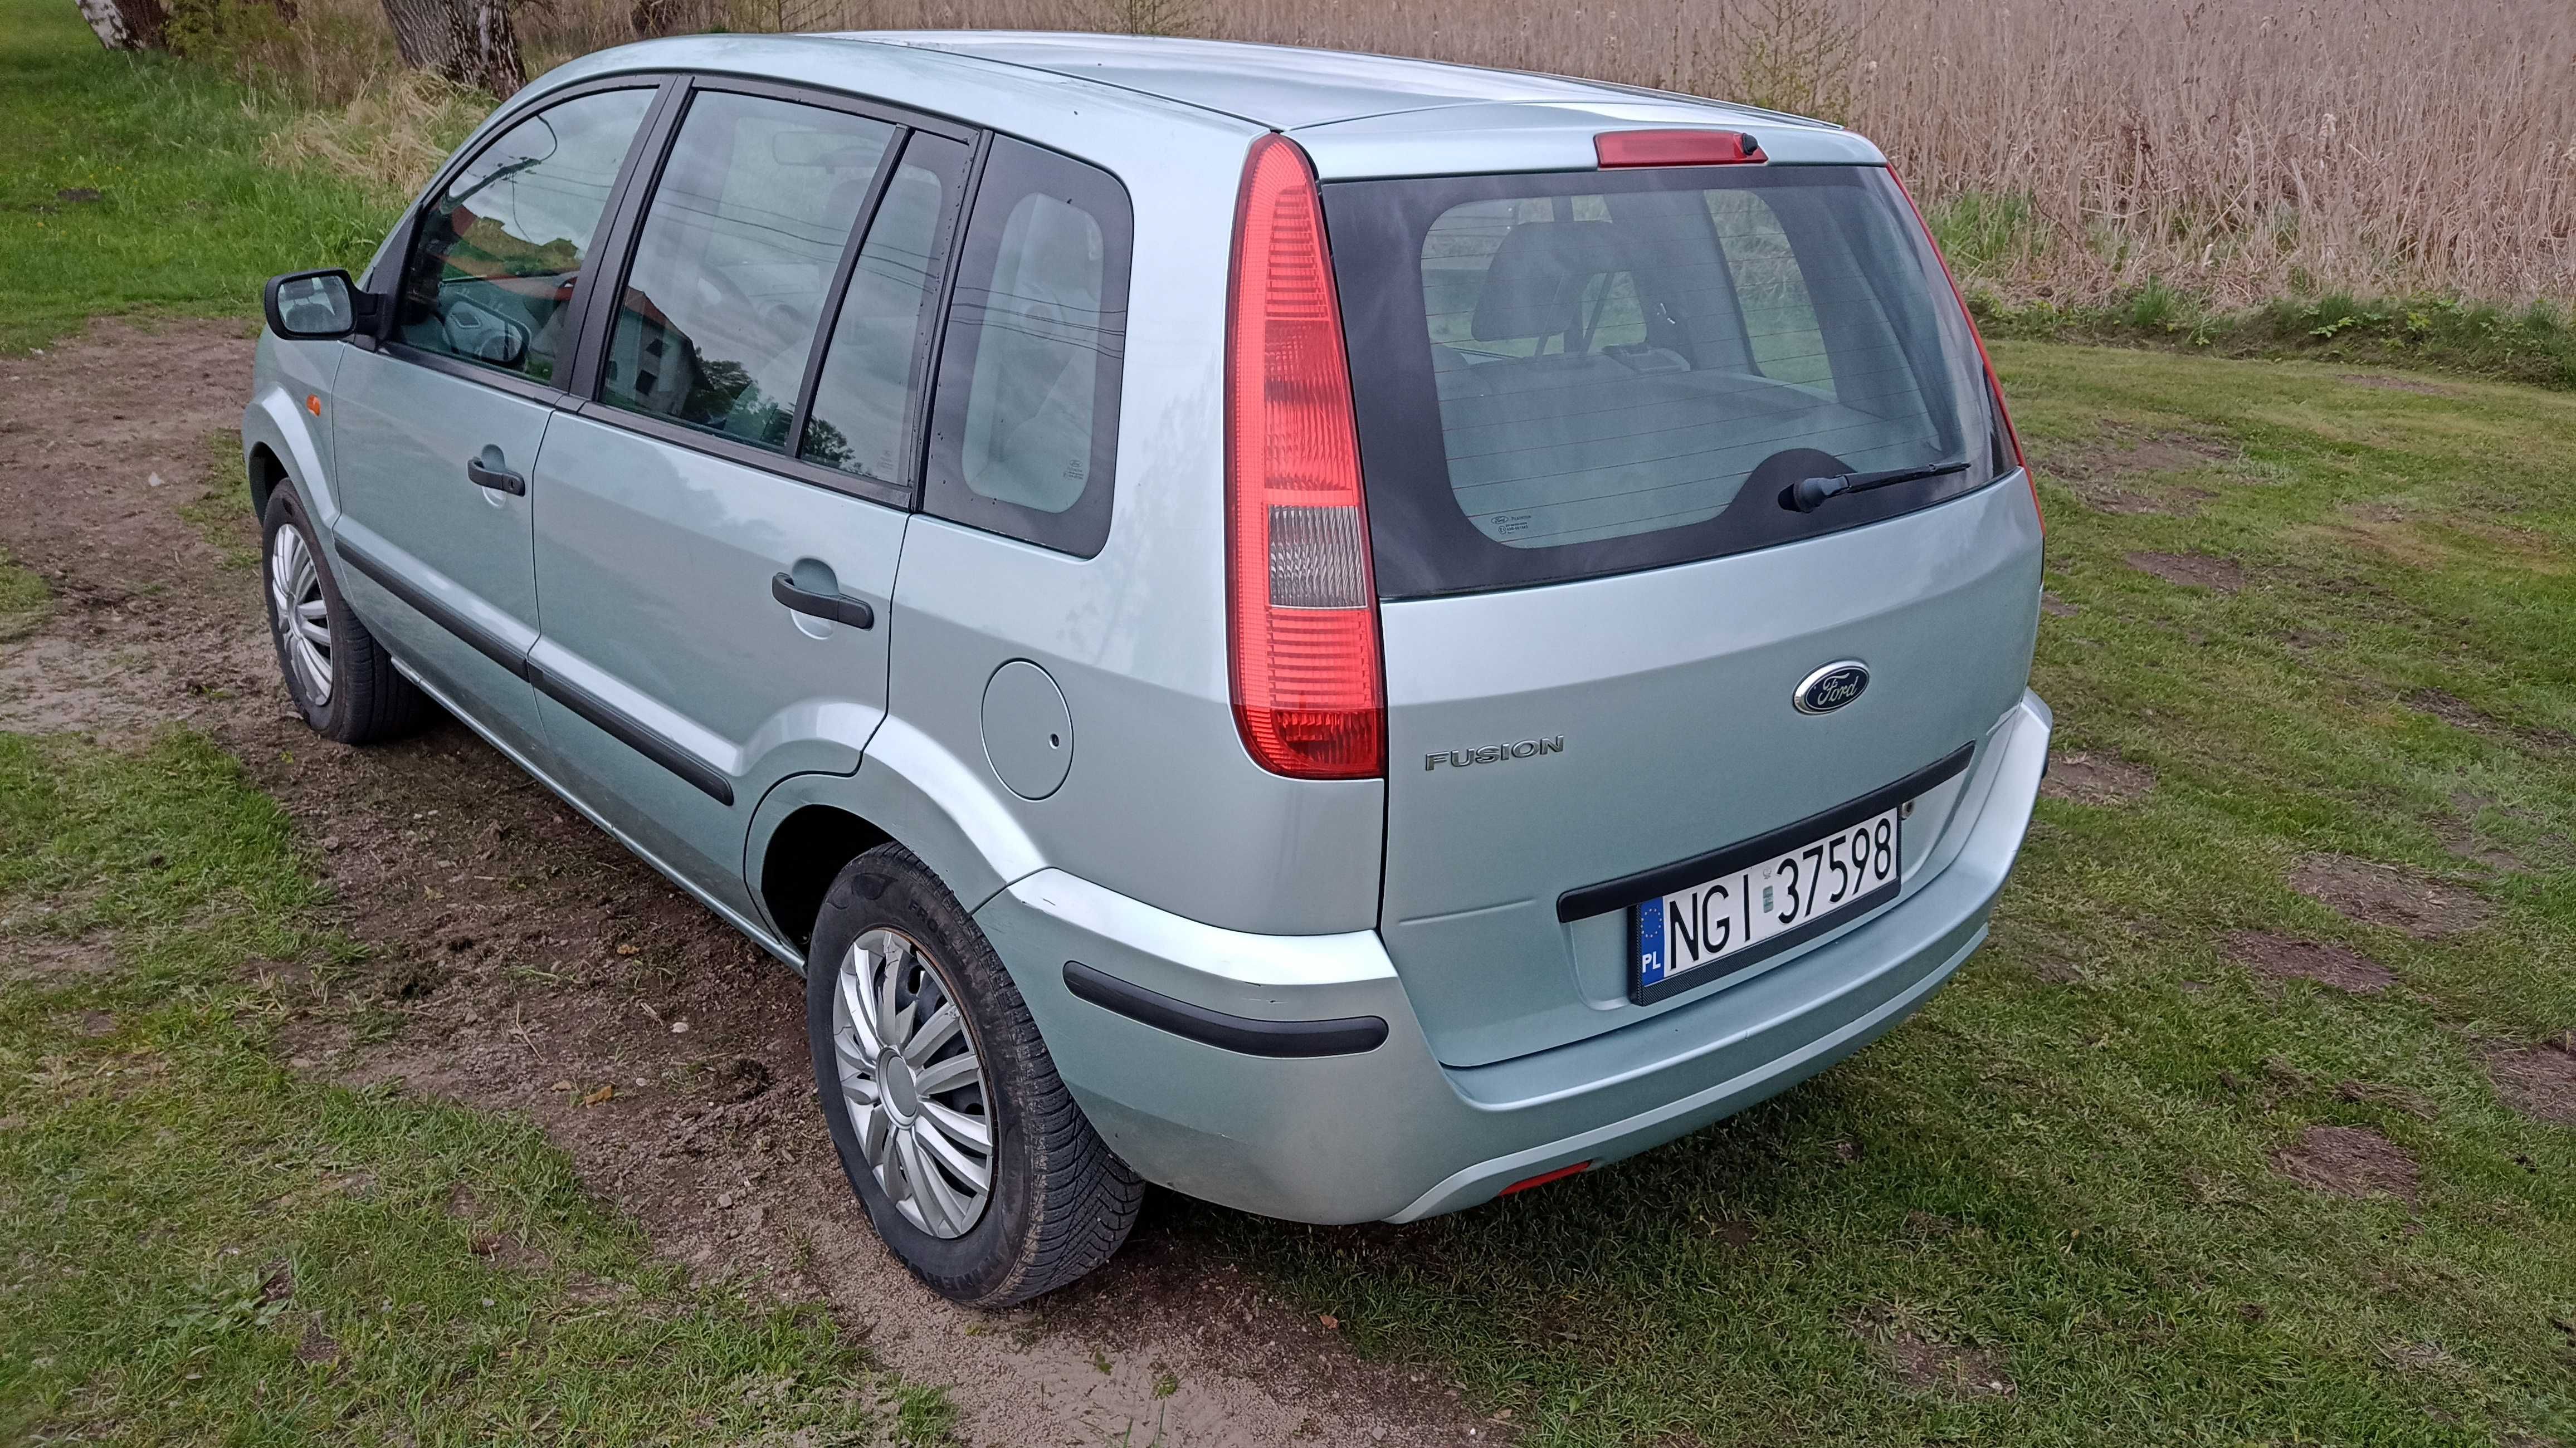 Ford Fusion 2004 1.4 benzyna